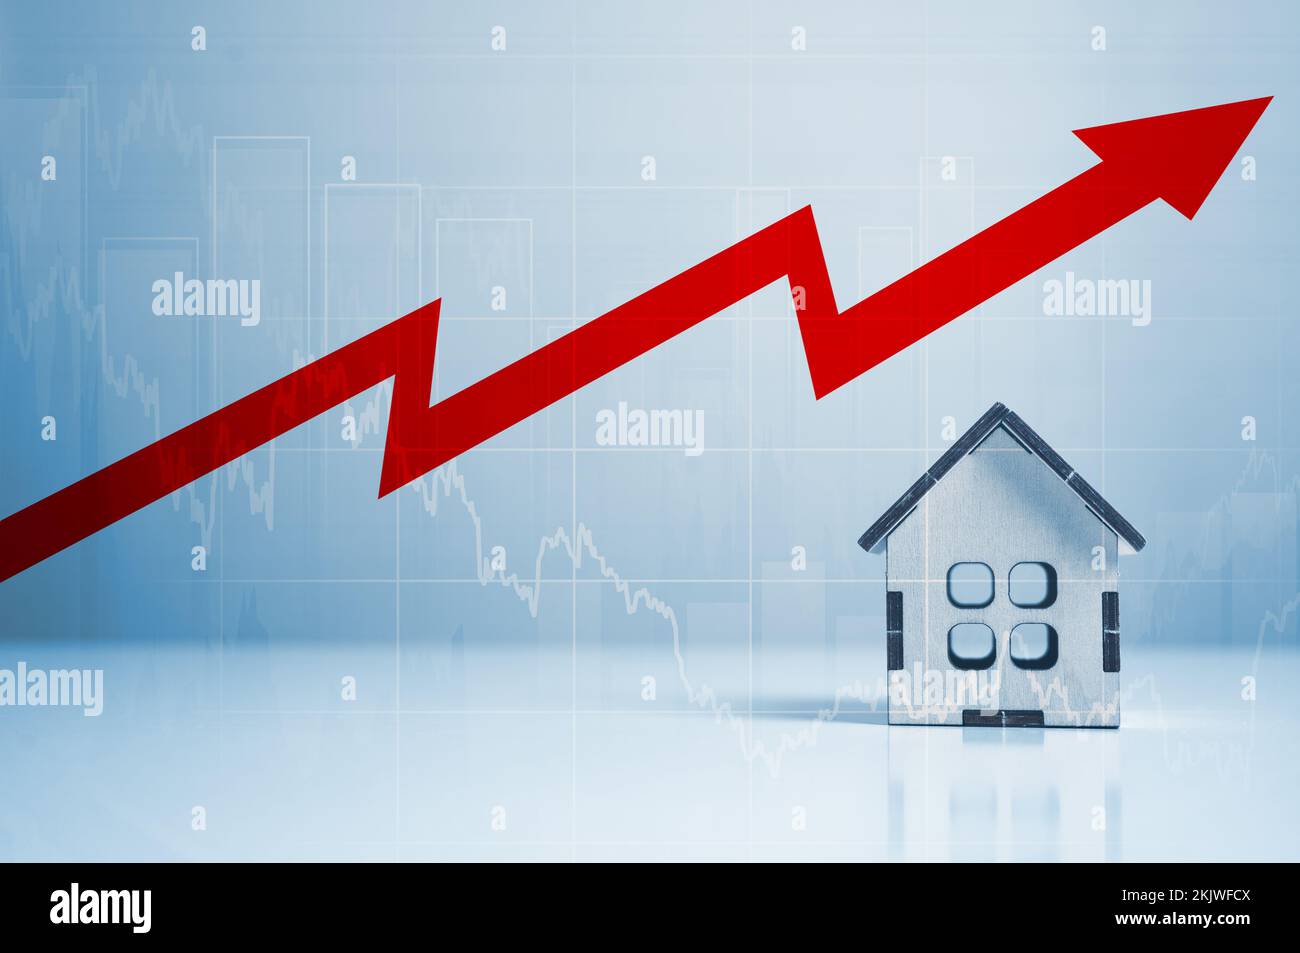 Increasing cost of housing. High demand for real estate. Growth of rent and mortgage rates. Miniature wooden houses and red arrow up. Crisis in rental Stock Photo